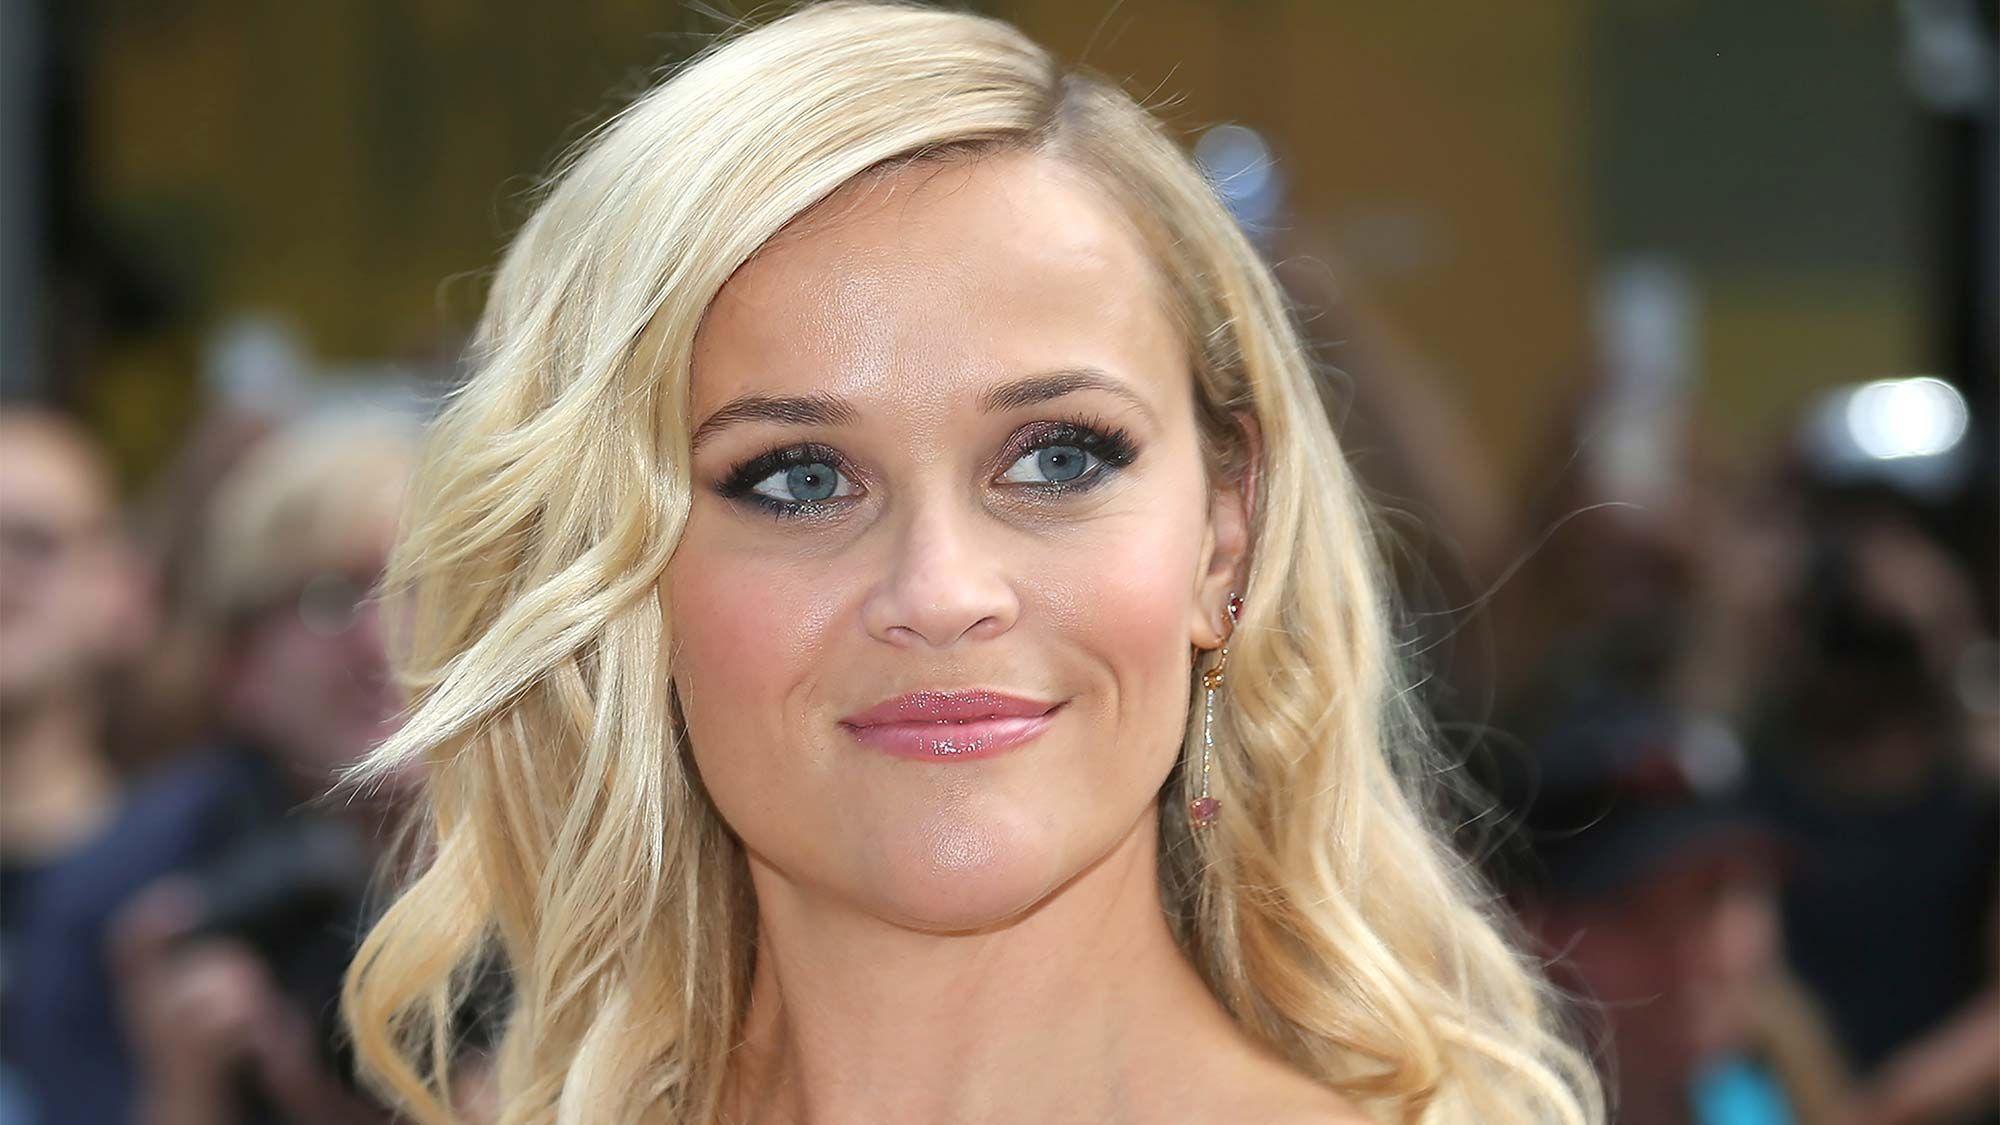 Wallpaper Reese Witherspoon Wallpapers